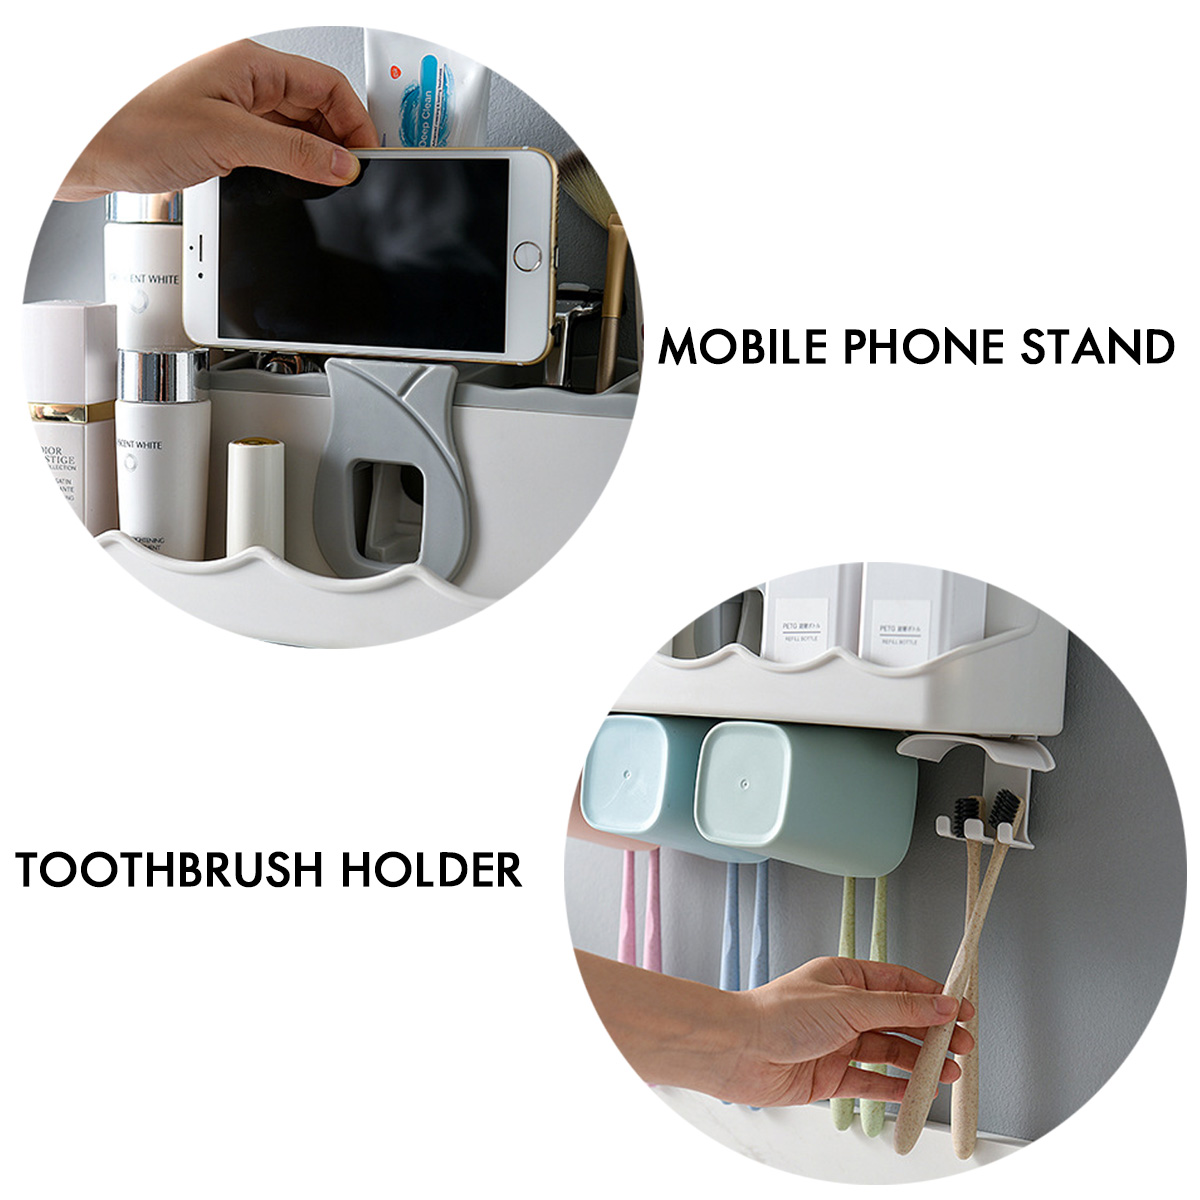 Toothbrush-Holder-Mulitfunction-Wall-Toothpaste-Squeezer-Dispenser-for-Bathroom-Accessories-Storage--1838135-8